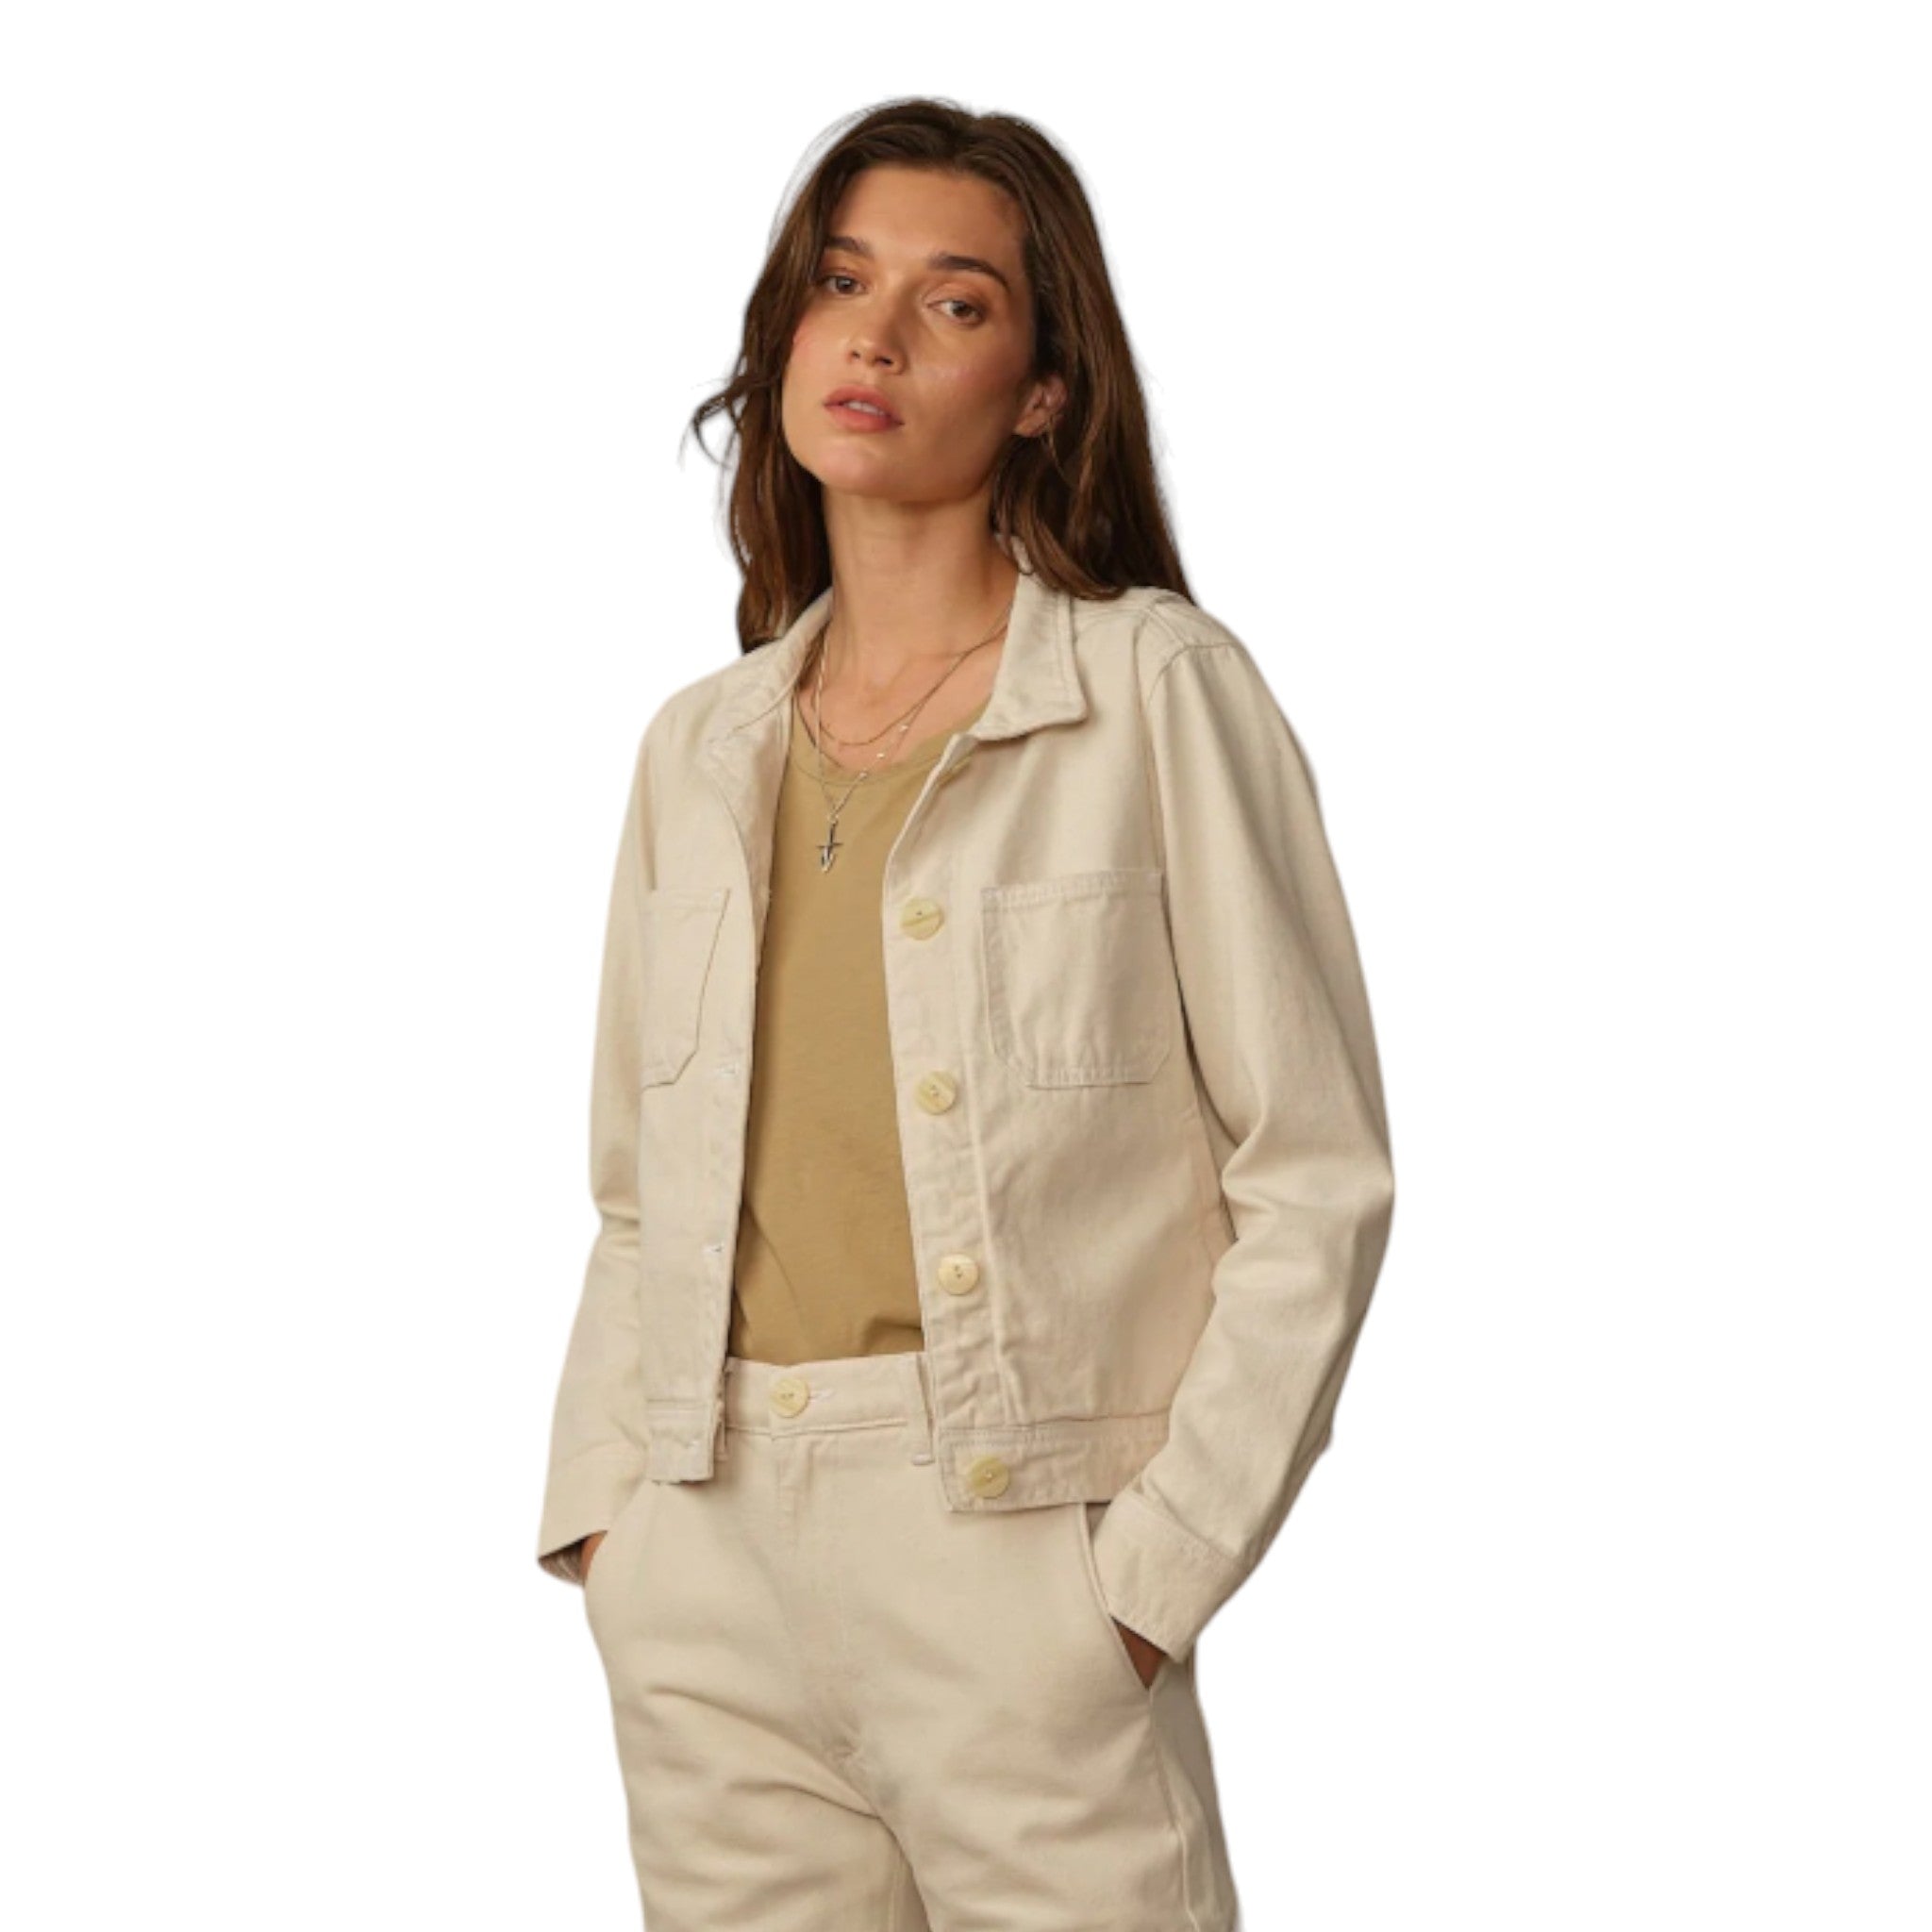 cream, denim style button up jacket with patch pockets on the chest and regular pockets with a cinching detail at the waist in the back